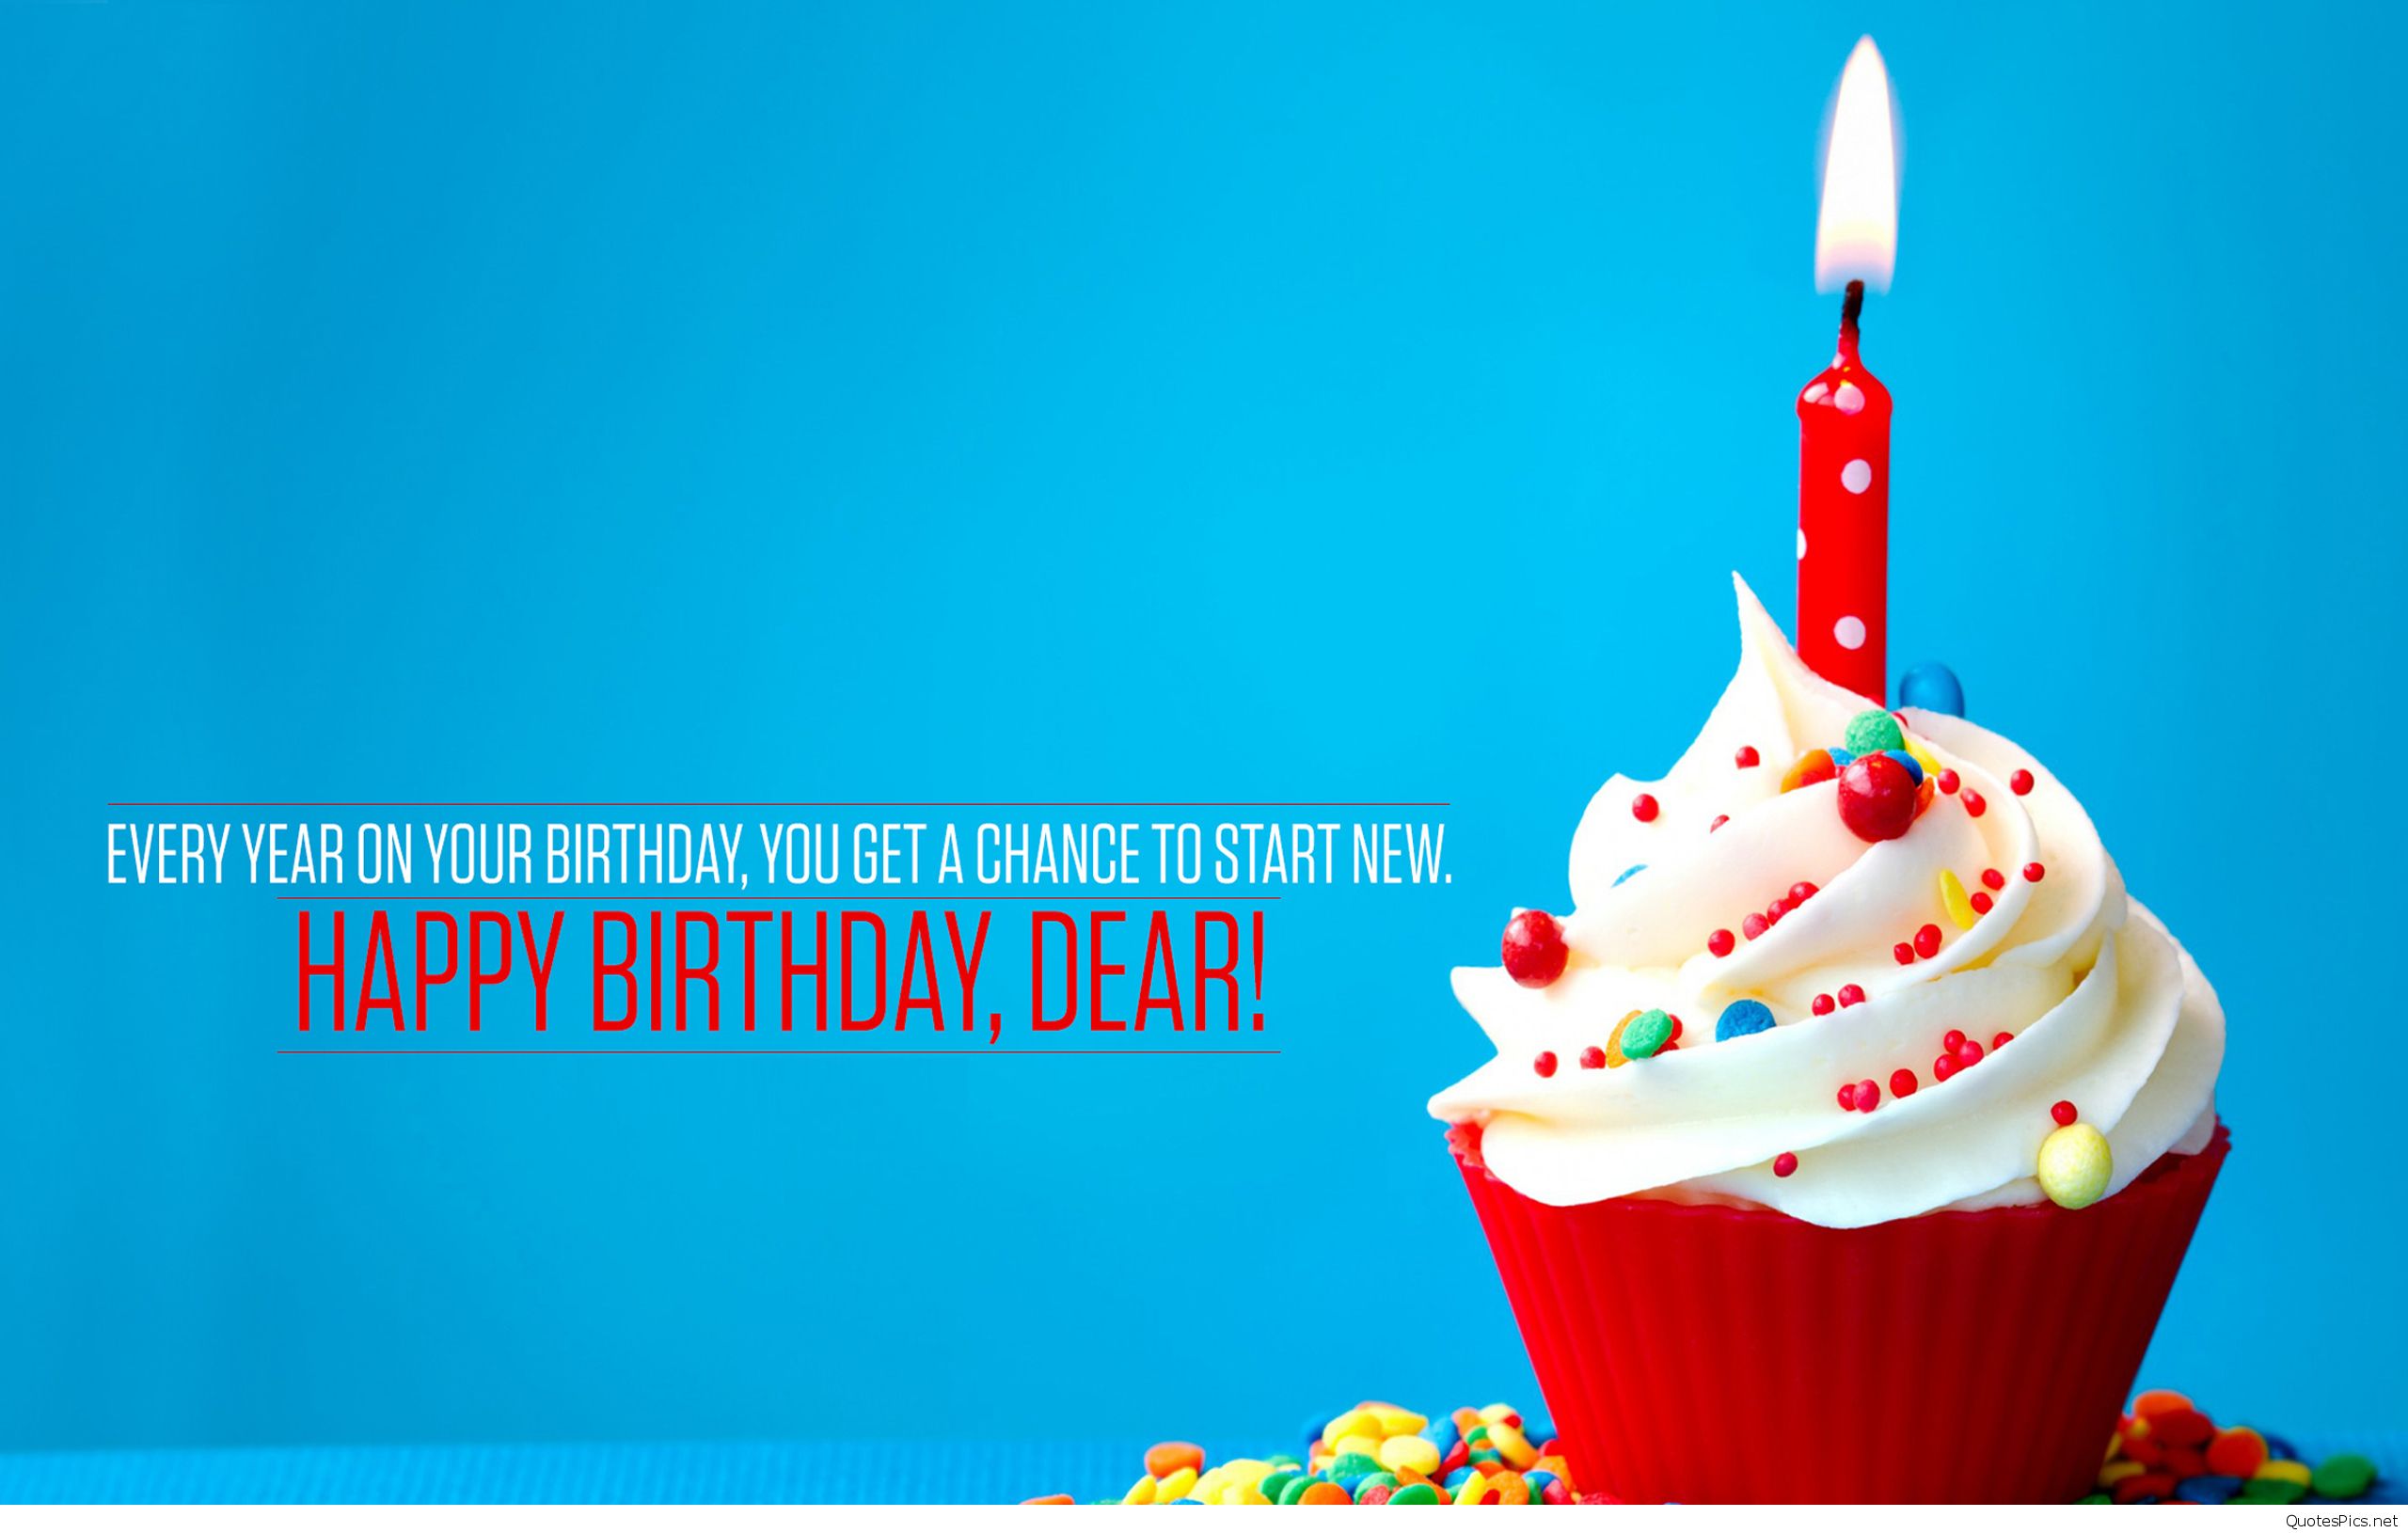 Amazing Birthday Wishes Cards And Wallpapers Hd - Happy Birthday Greetings Hd , HD Wallpaper & Backgrounds